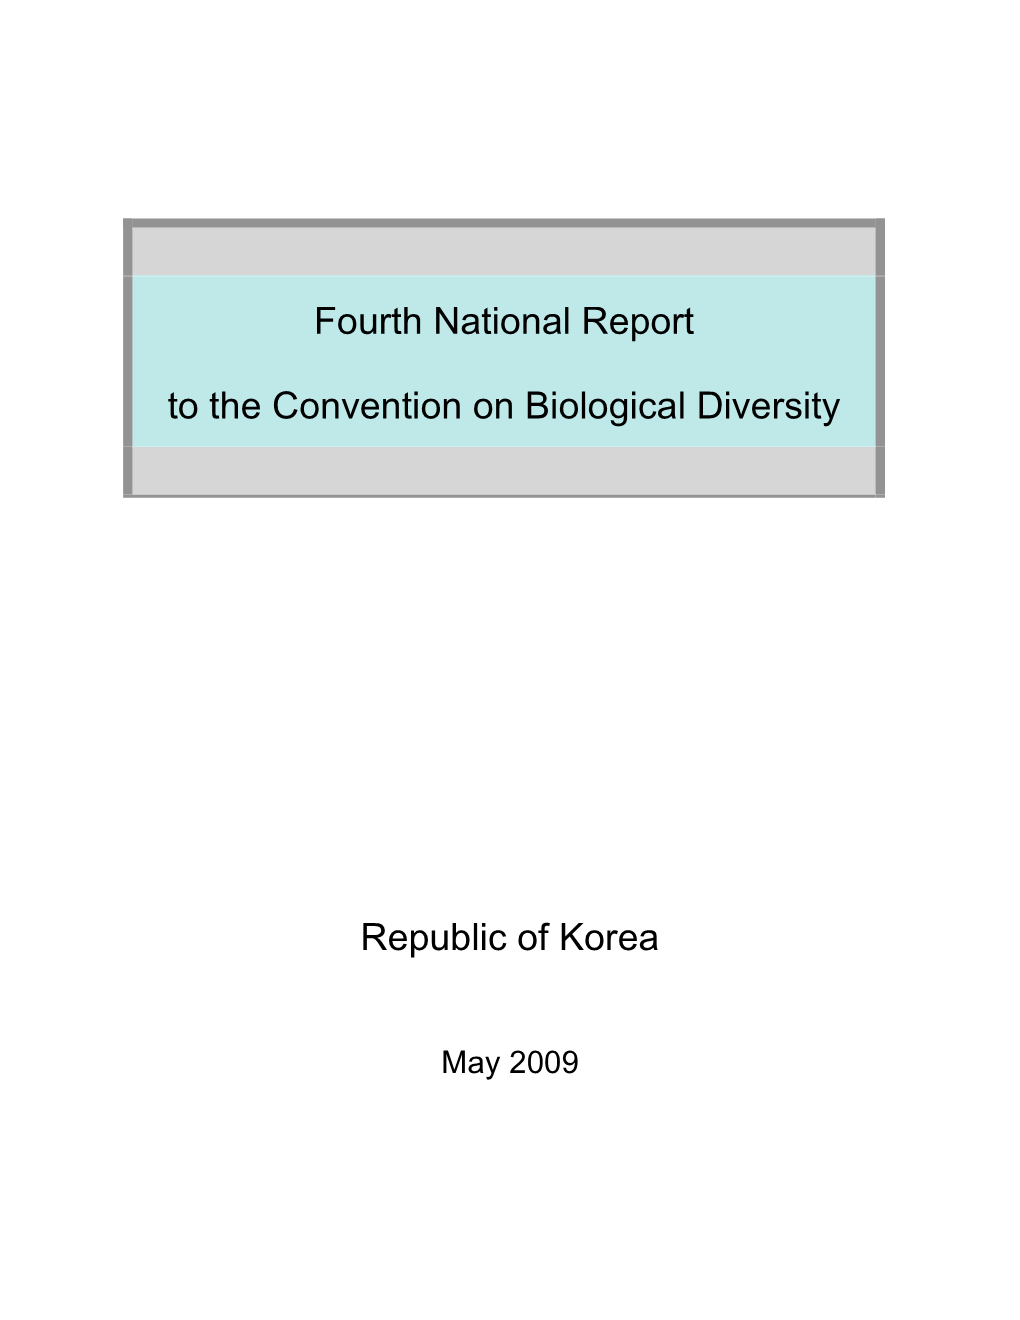 Republic of Korea Fourth National Report to the Convention on Biological Diversity